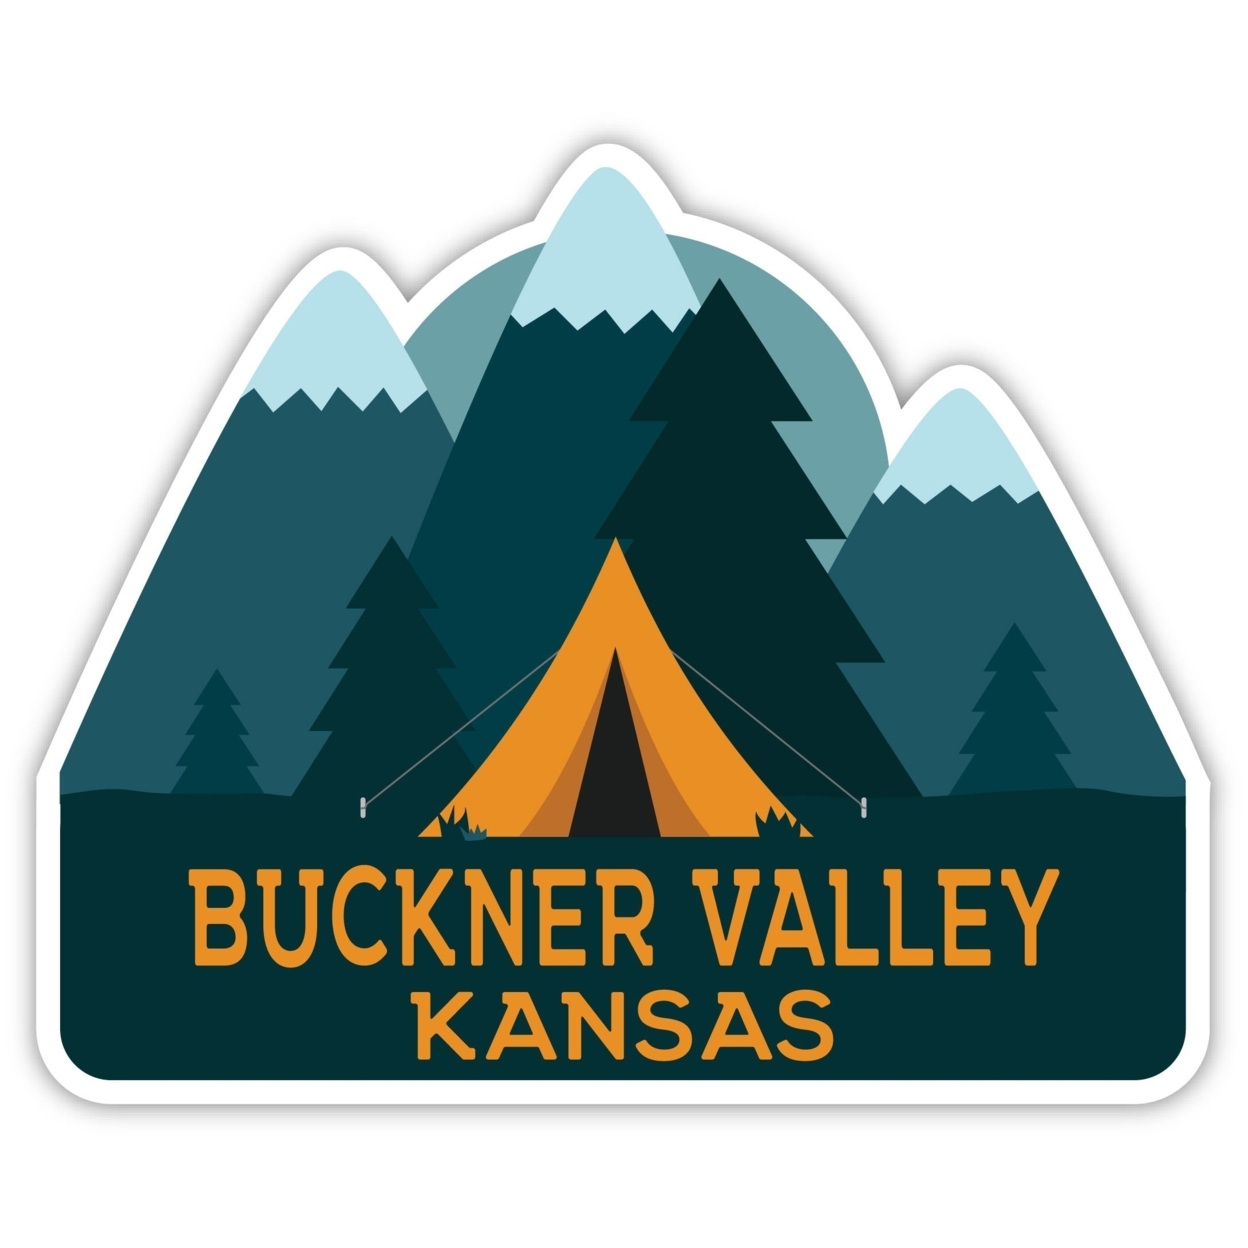 Buckner Valley Kansas Souvenir Decorative Stickers (Choose Theme And Size) - 4-Pack, 4-Inch, Tent